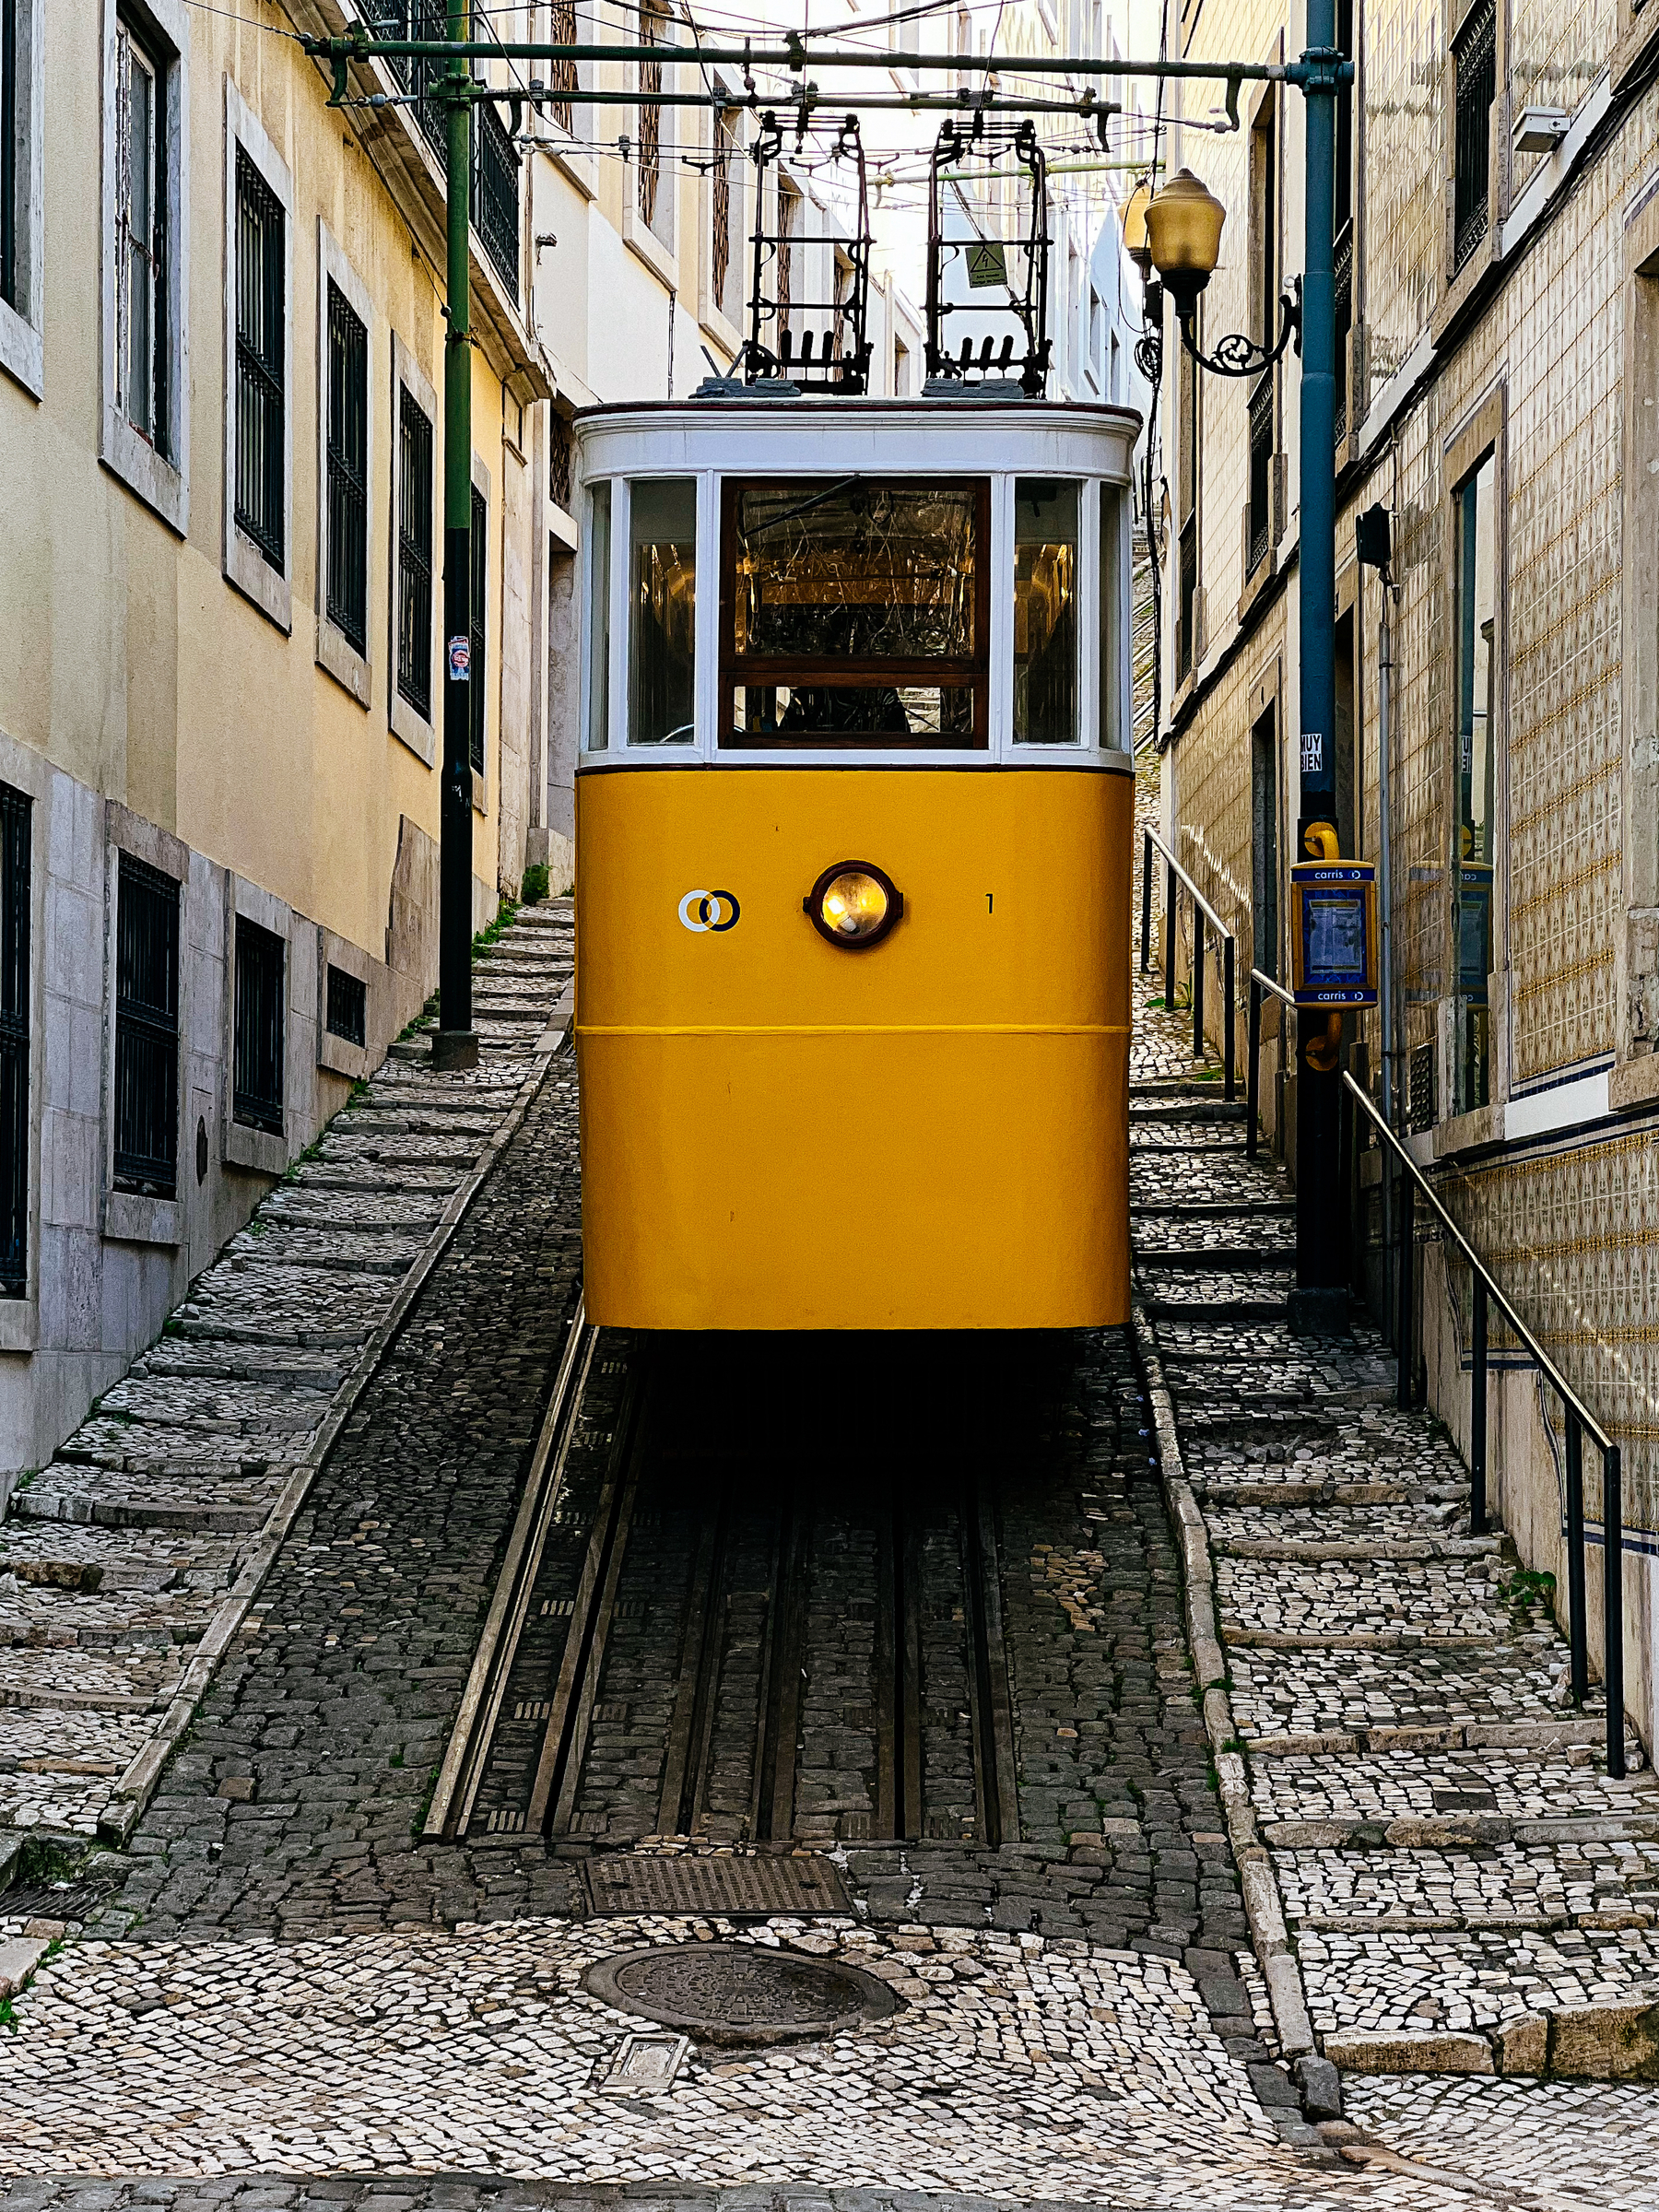 A yellow funicular tram moves up a steep, cobblestone street between traditional buildings, with power lines above and a streetlamp to the right.